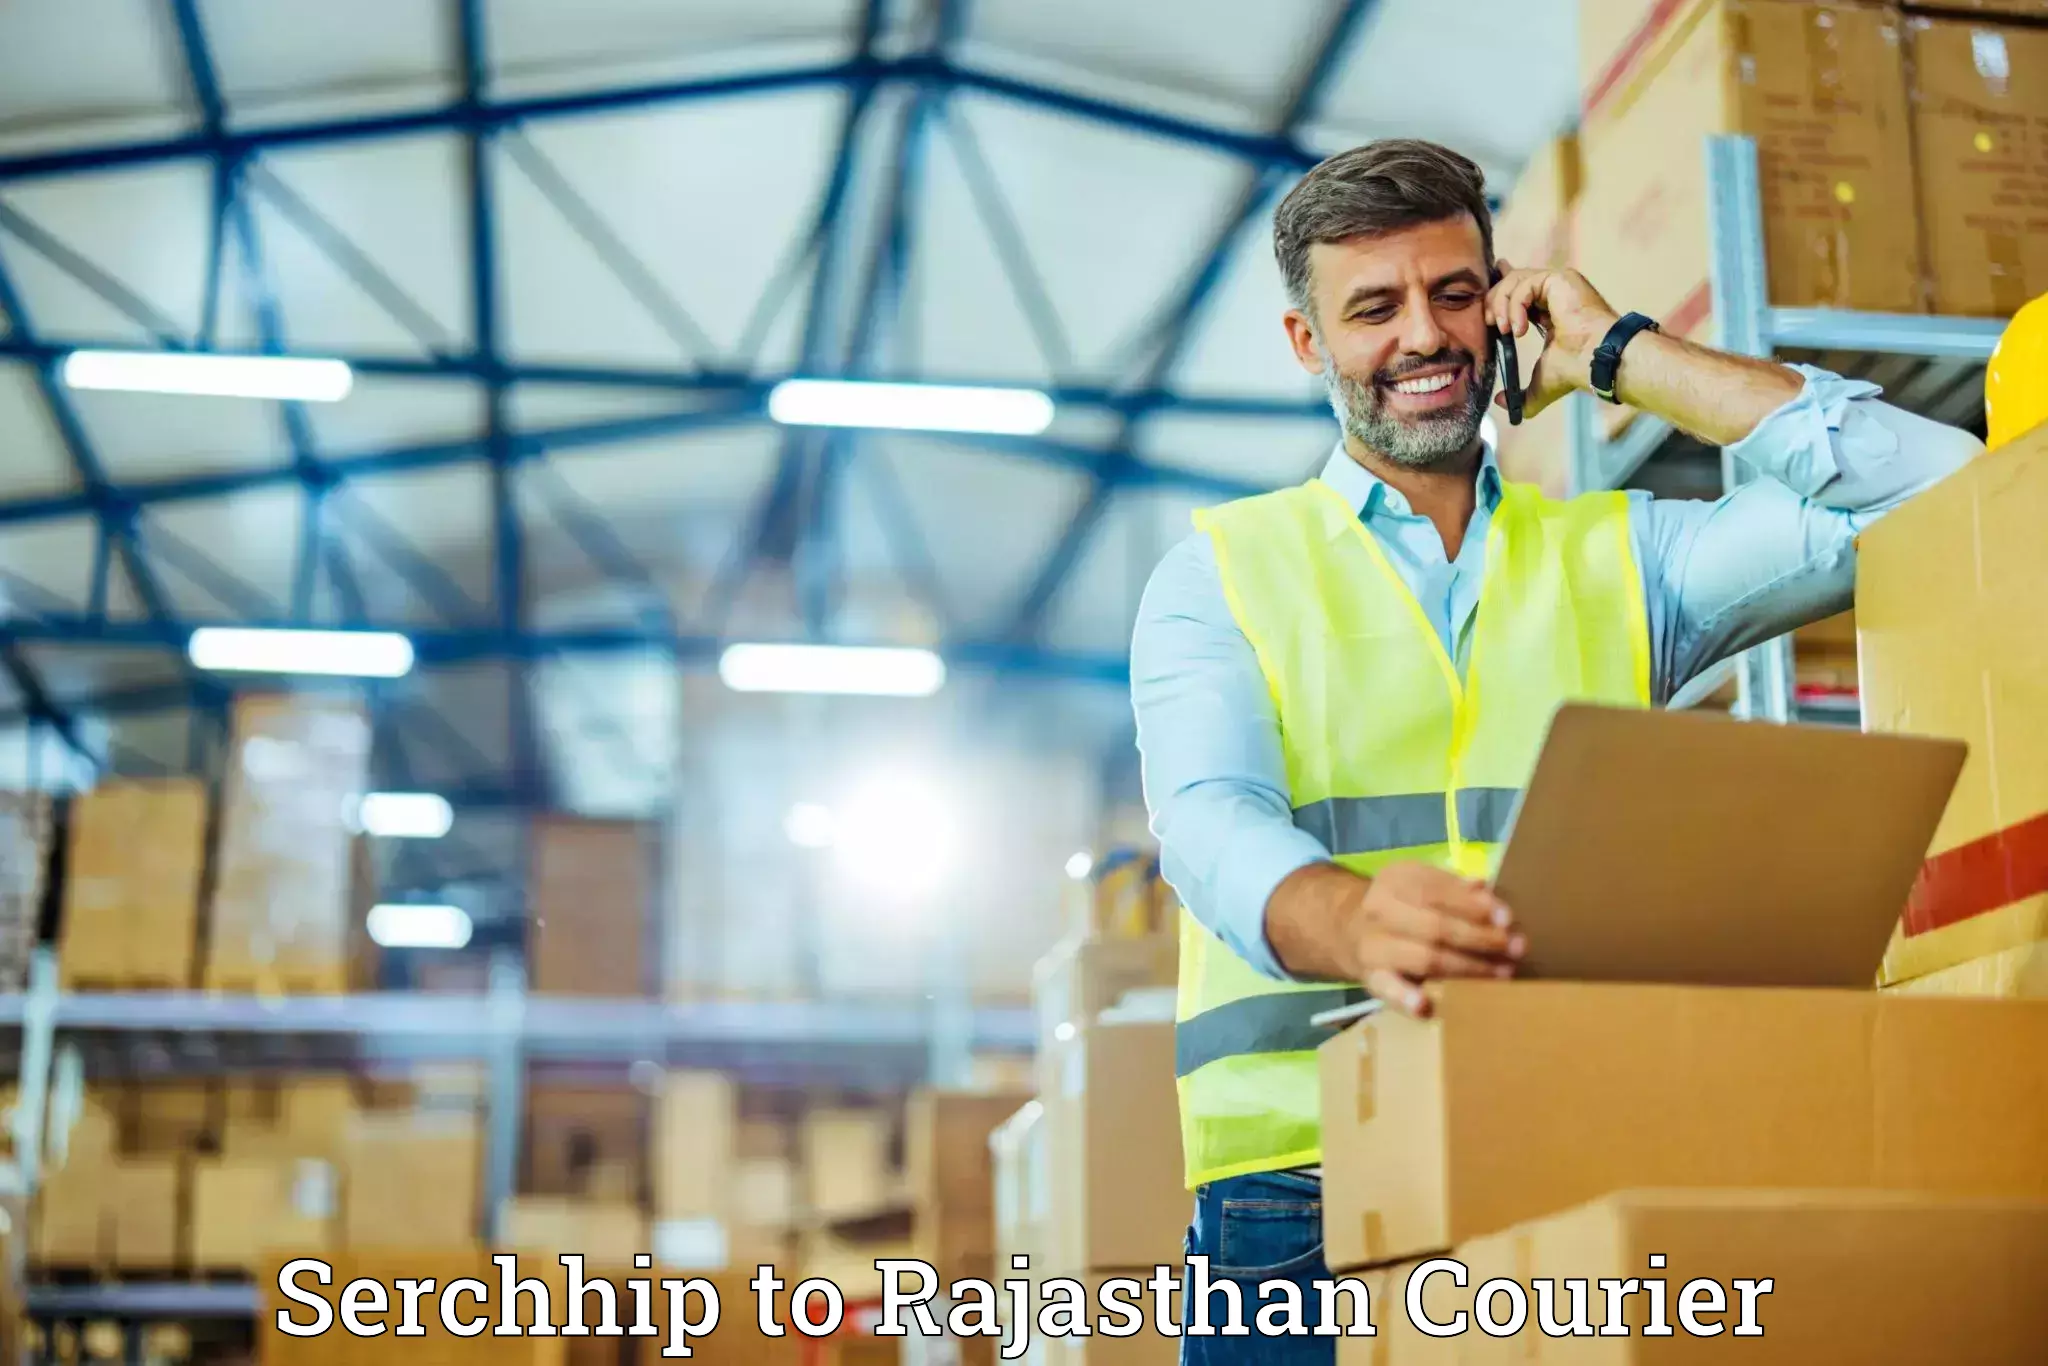 Furniture delivery service Serchhip to Jalore